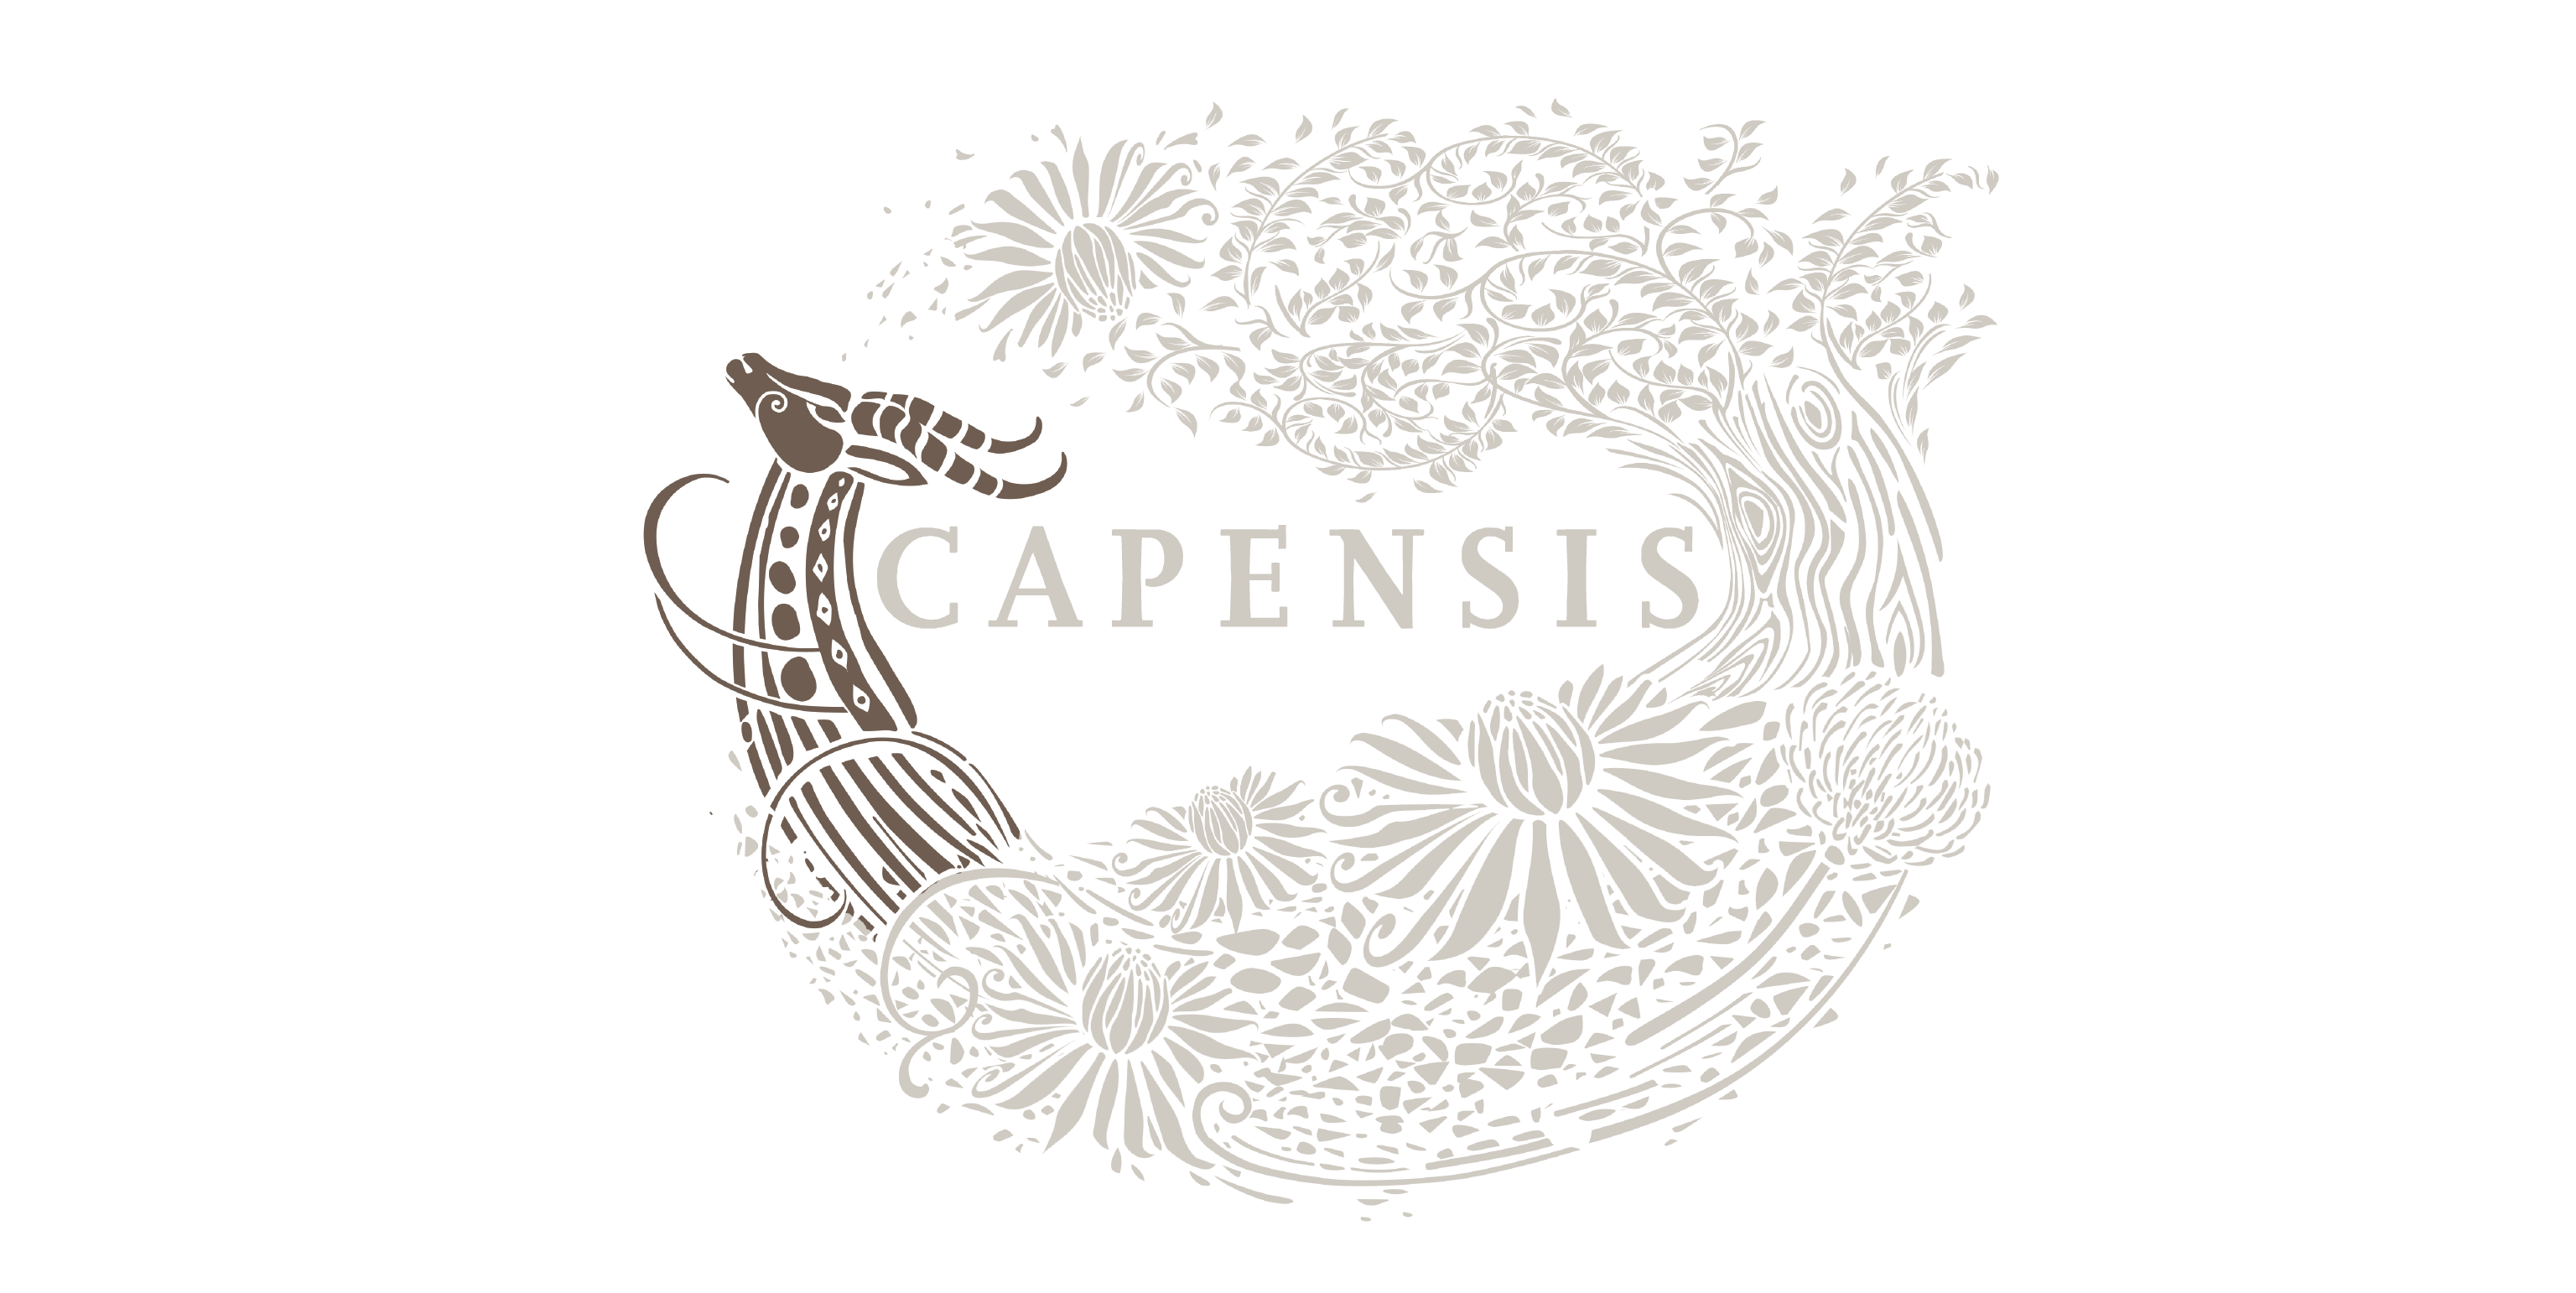 Capensis label with Springbok highlighted